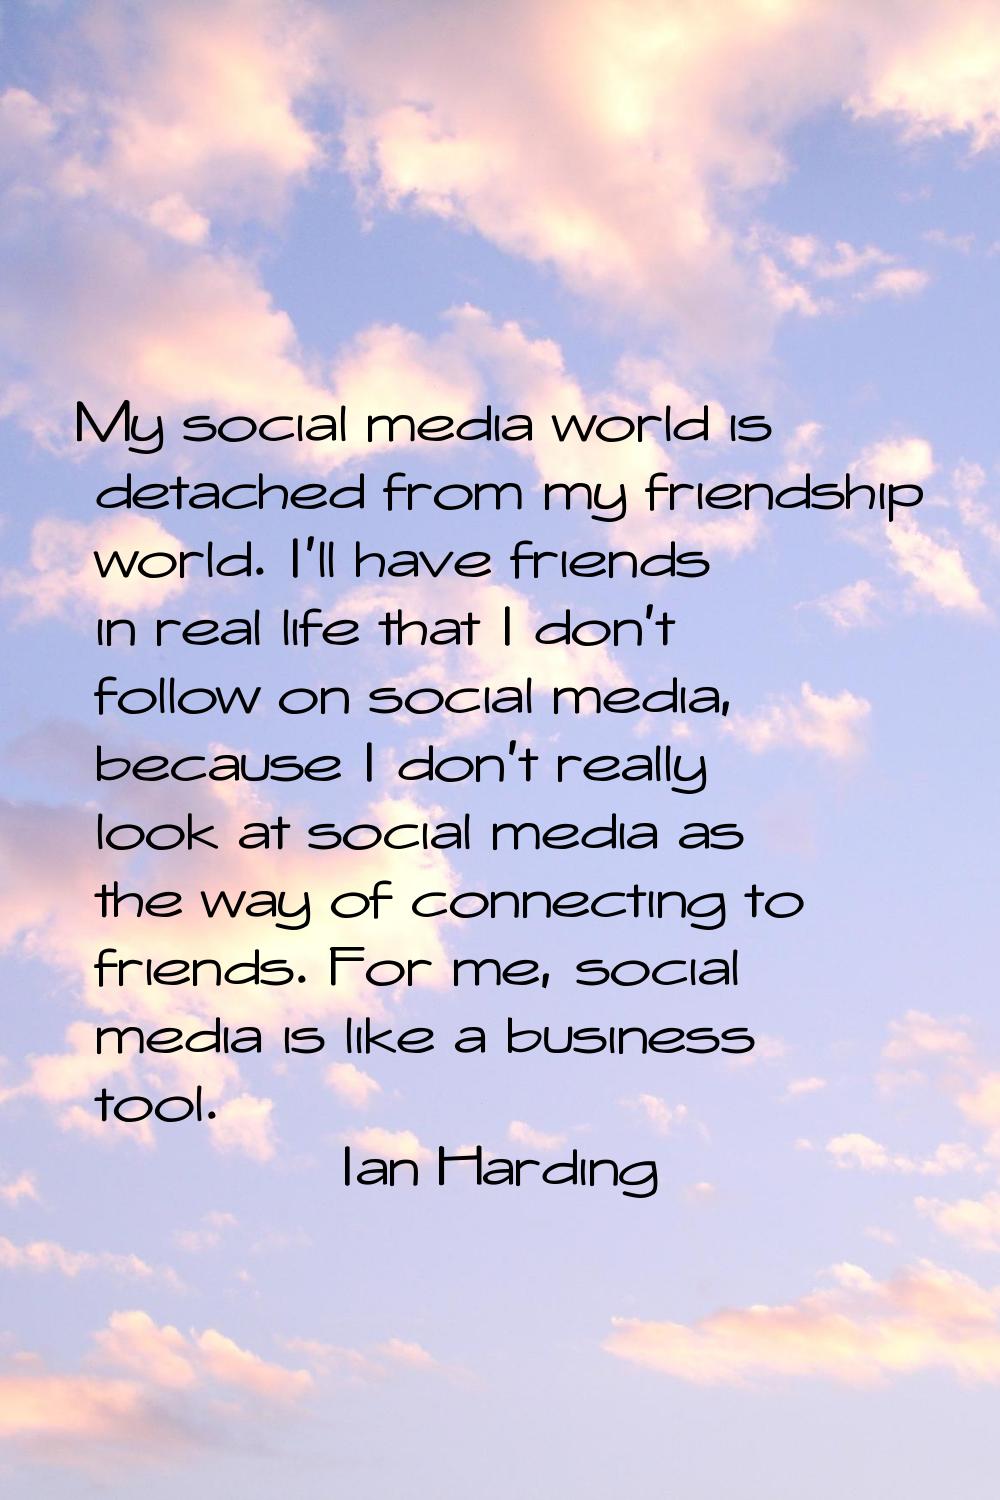 My social media world is detached from my friendship world. I'll have friends in real life that I d